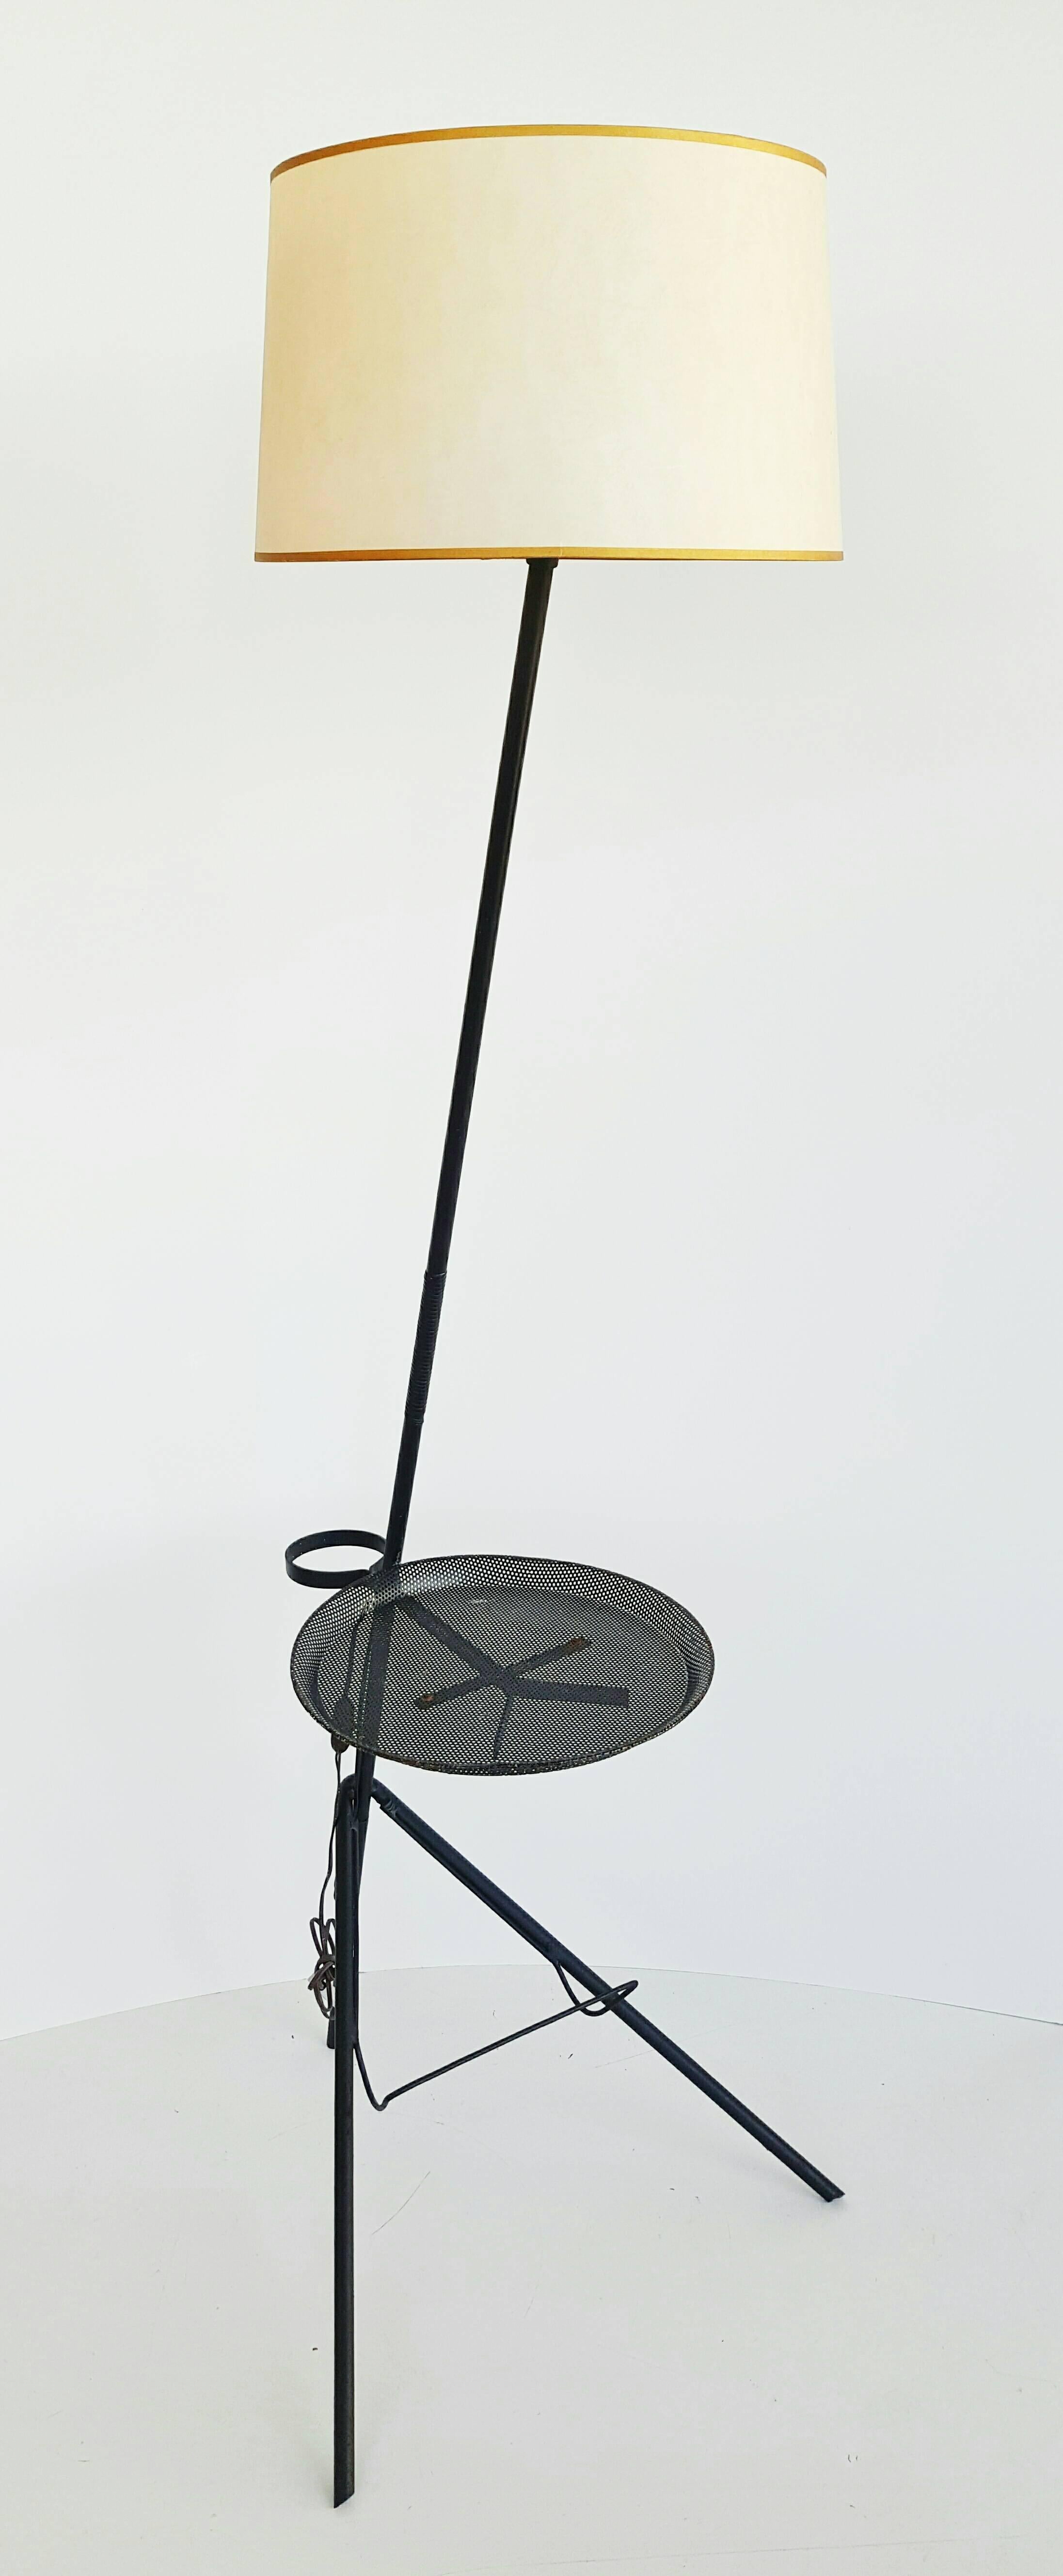 French Attributed to Mathieu Matégot Floor Lamp, France, 1950